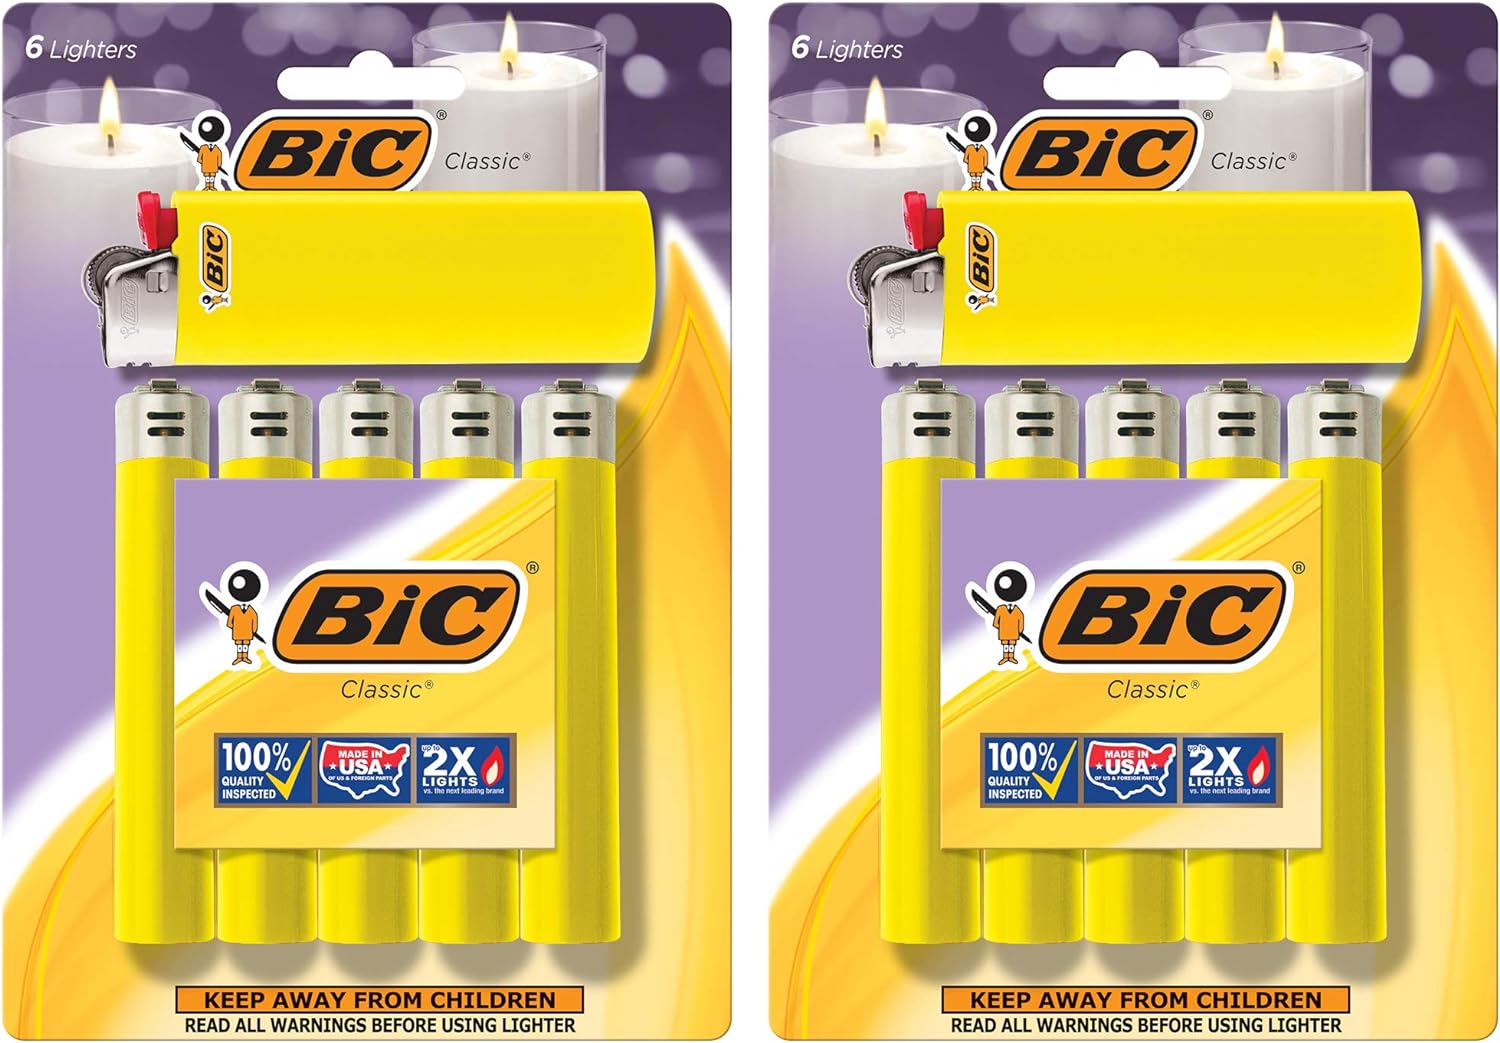 I ordered all yellow as I constantly misplace my lighter. Ive ordered mine from this seller many times over the years and theyve all been packaged and work great! I have problems using my right hand and I find the Bics are the easiest to use and the most dependable lighters out there.